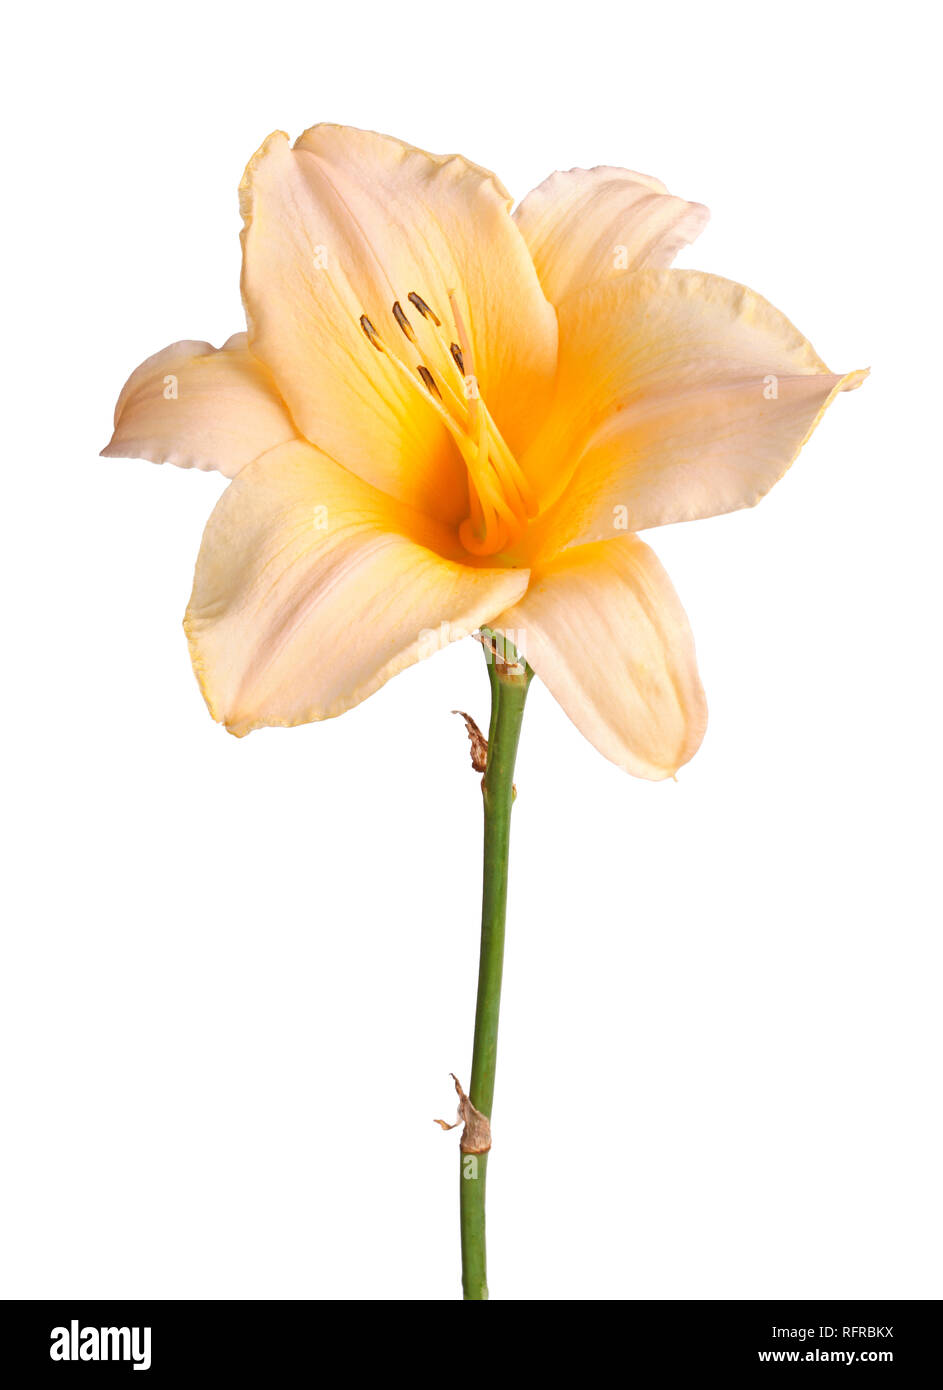 Single stem with a pink and yellow daylily flower (Hemerocallis hybrid) isolated against a white background Stock Photo